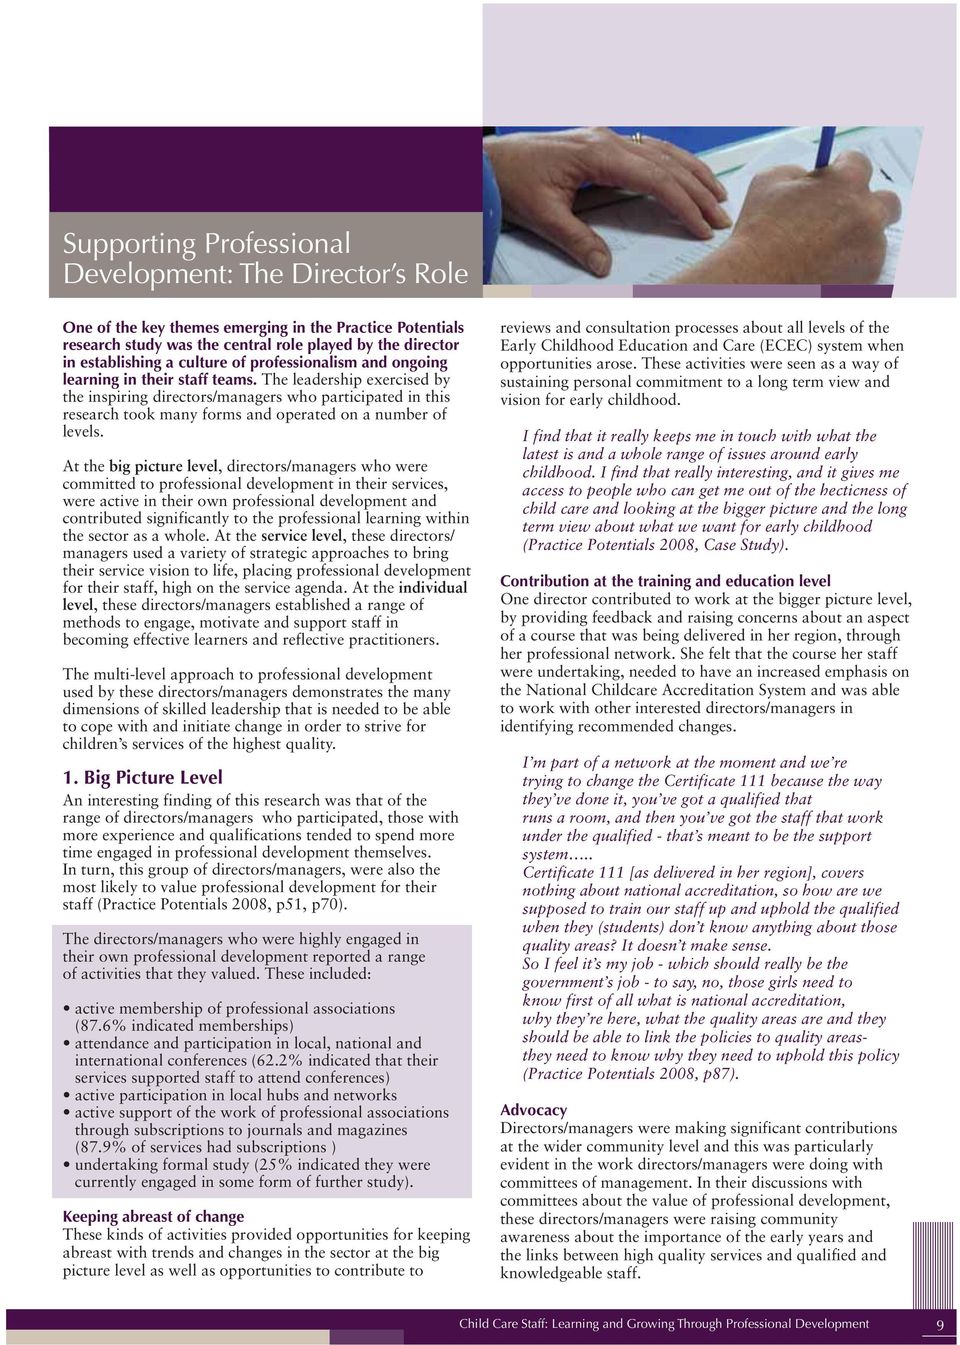 professionalism in early childhood education and care